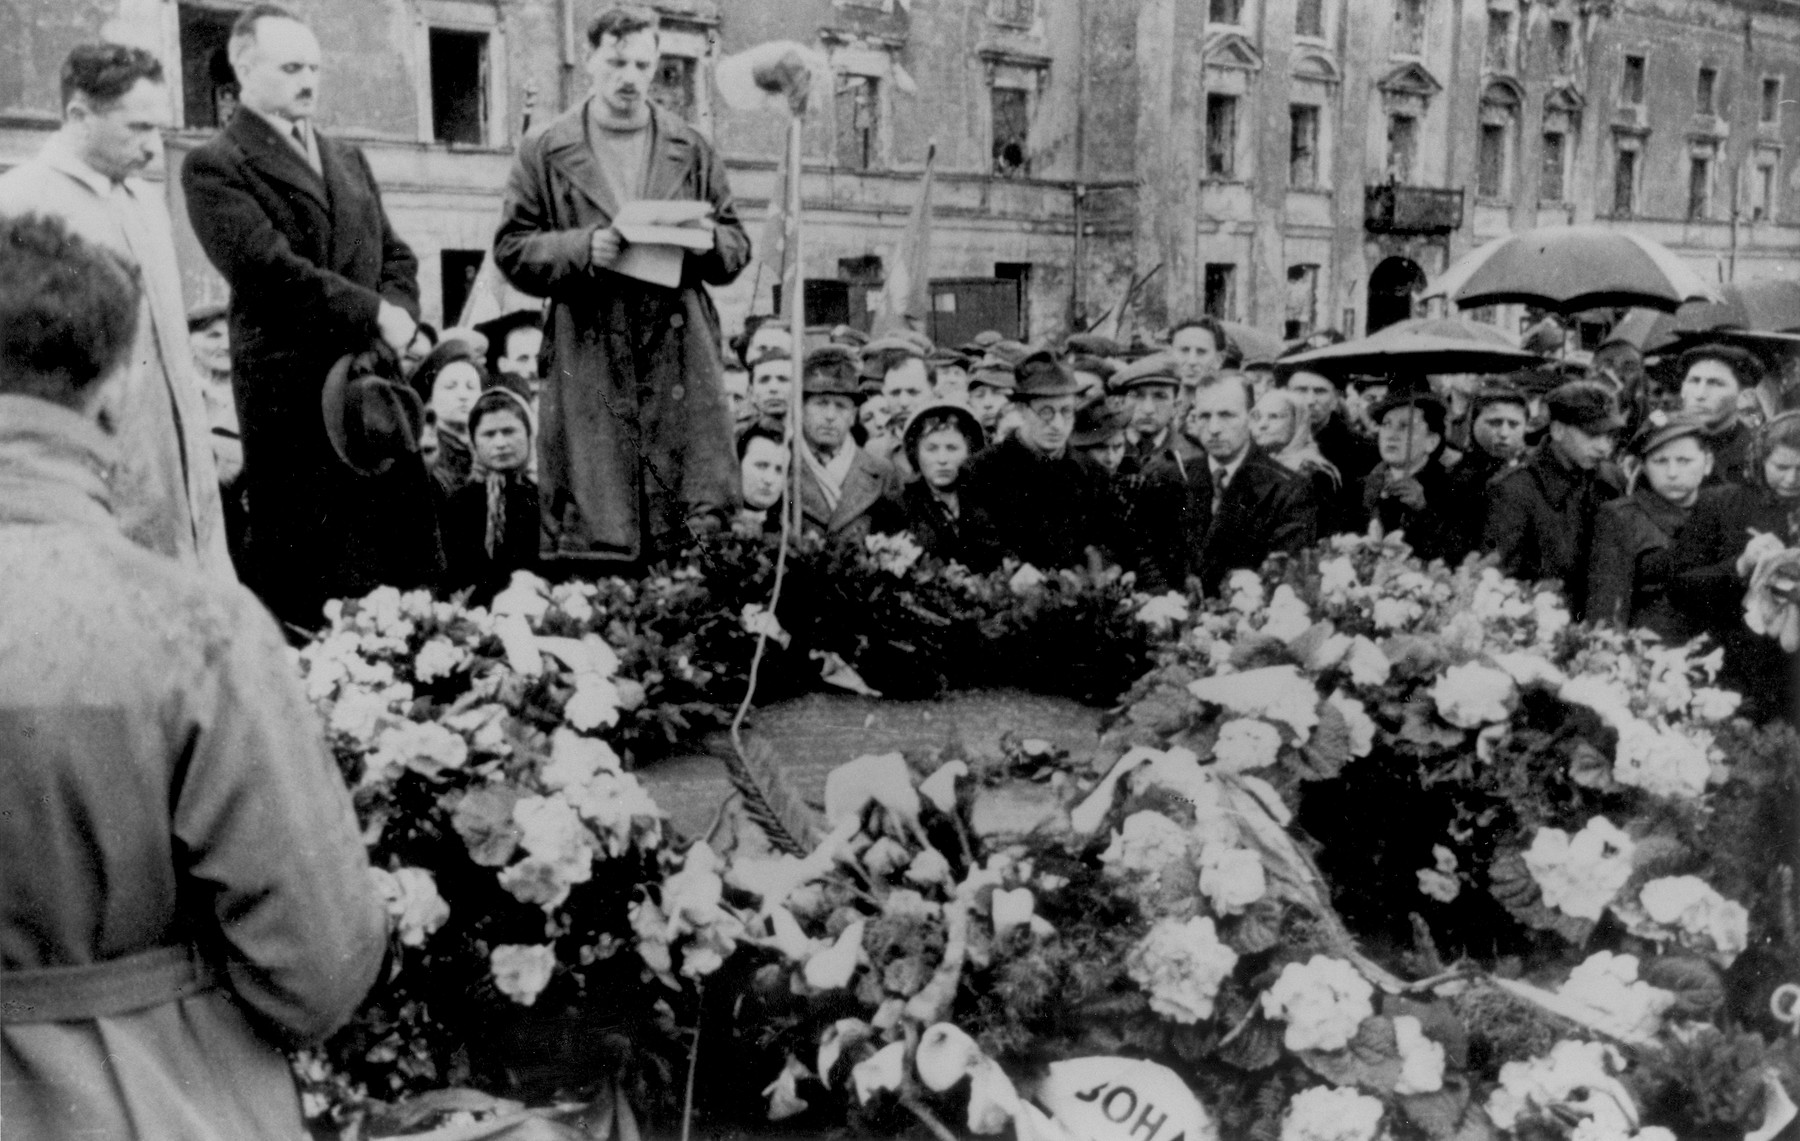 Yitzhak Zuckerman delivers a speech at a ceremony in front of the ruins of the former headquarters of the Warsaw ghetto Jewish council [probably to mark the fourth anniversary of the Warsaw ghetto uprising].

Also pictured is Dr. Adolf Berman (standing next to Zuckerman).